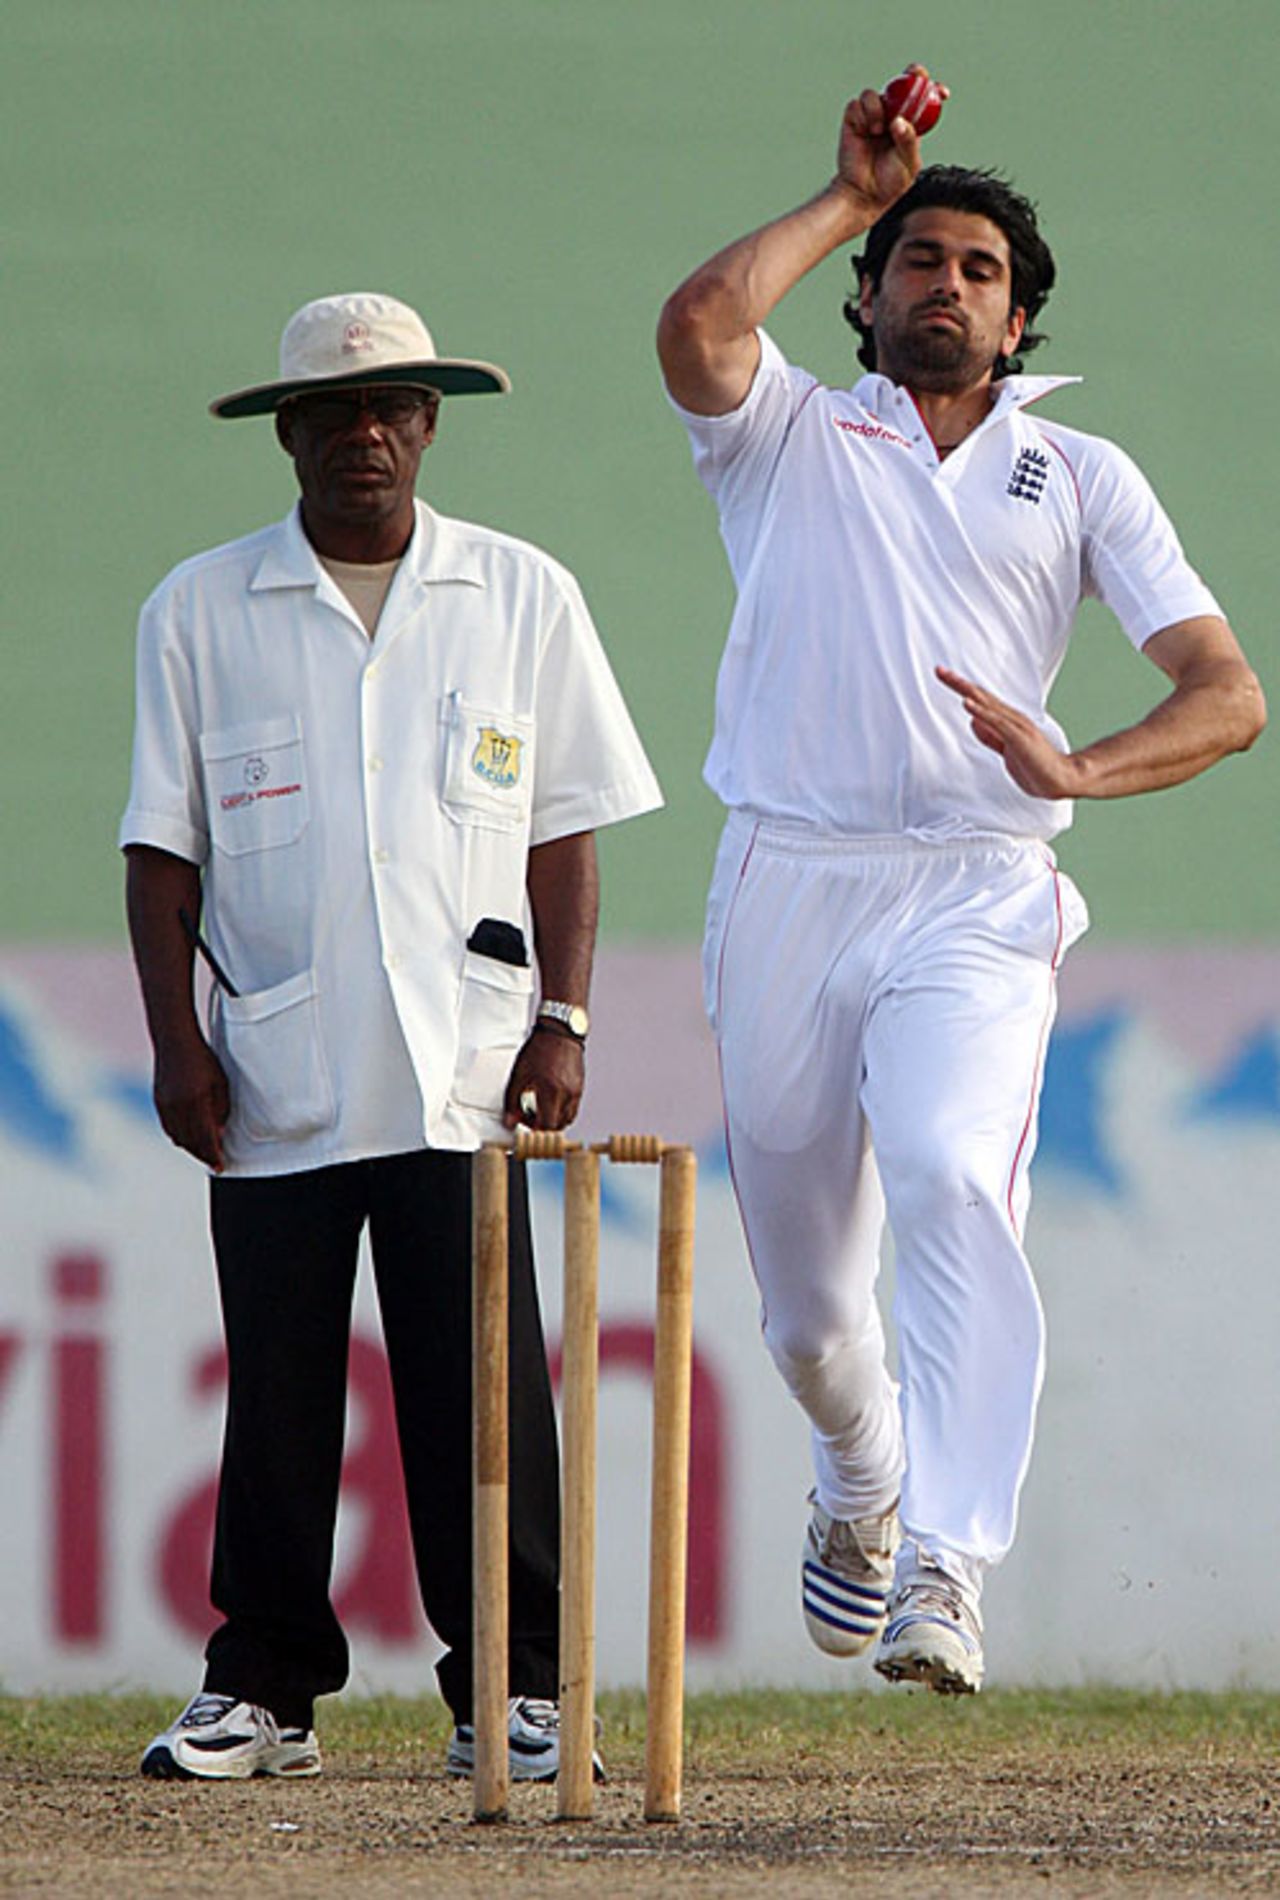 Amjad Khan took two early wickets, Barbados Cricket Association President's XI v England XI, Barbados, 1st day, February 22, 2009